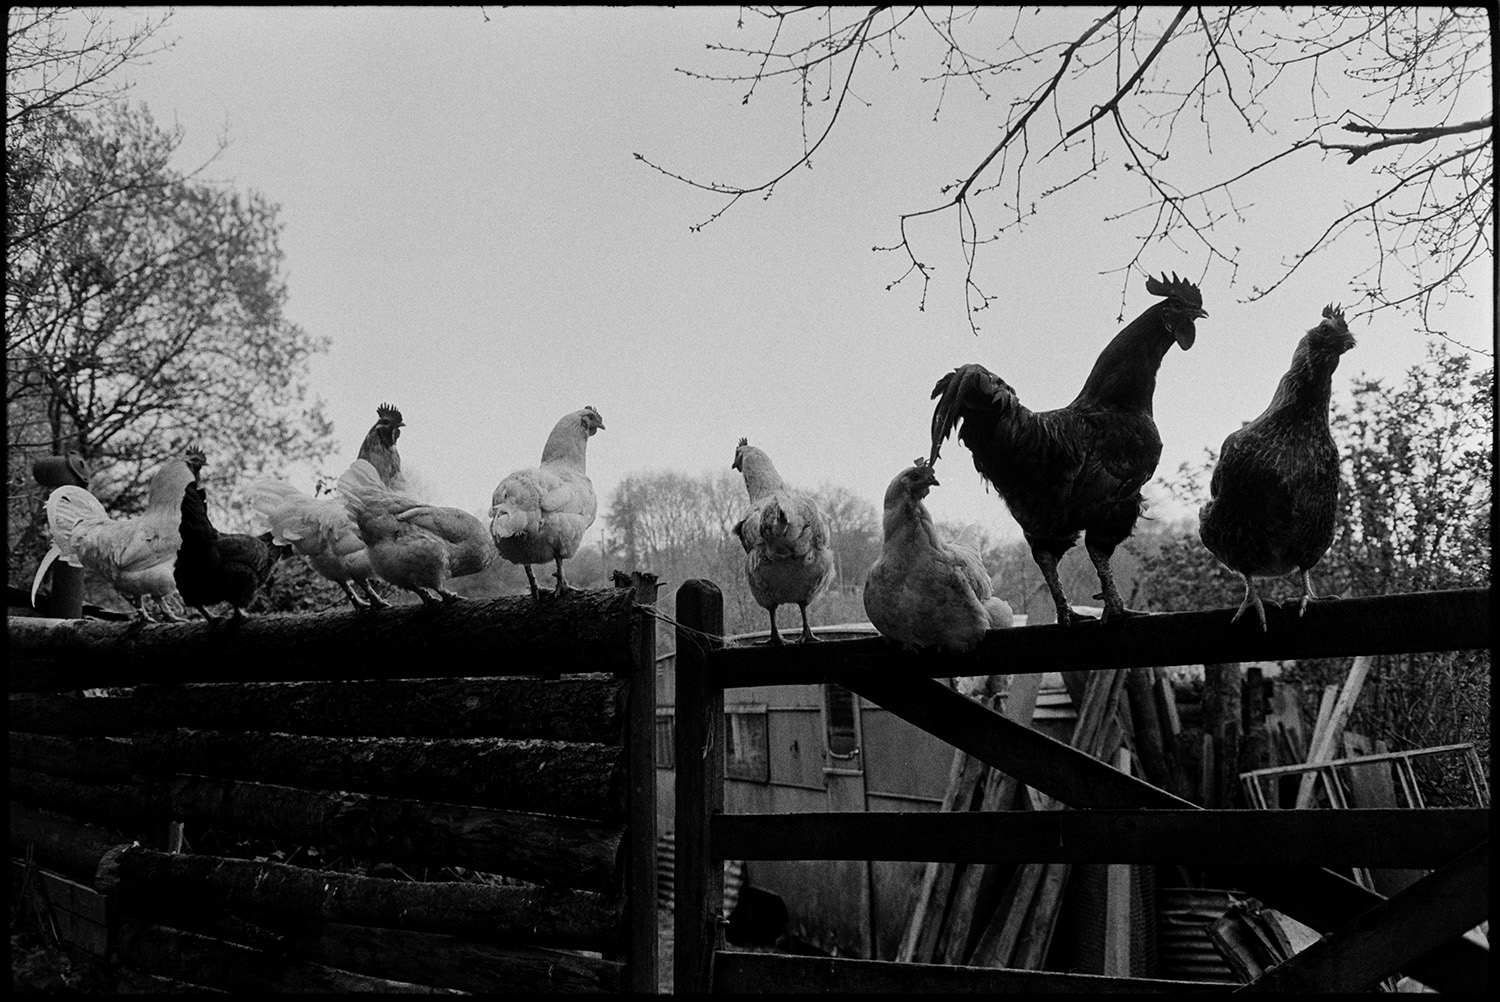 Chickens sitting on gate, cockerel crowing.
[A row of chickens and a cockerel sitting on a fence and gate at Millhams,  Dolton. An old caravan, sheets of corrugated iron and timber can be seen through the gateway.]